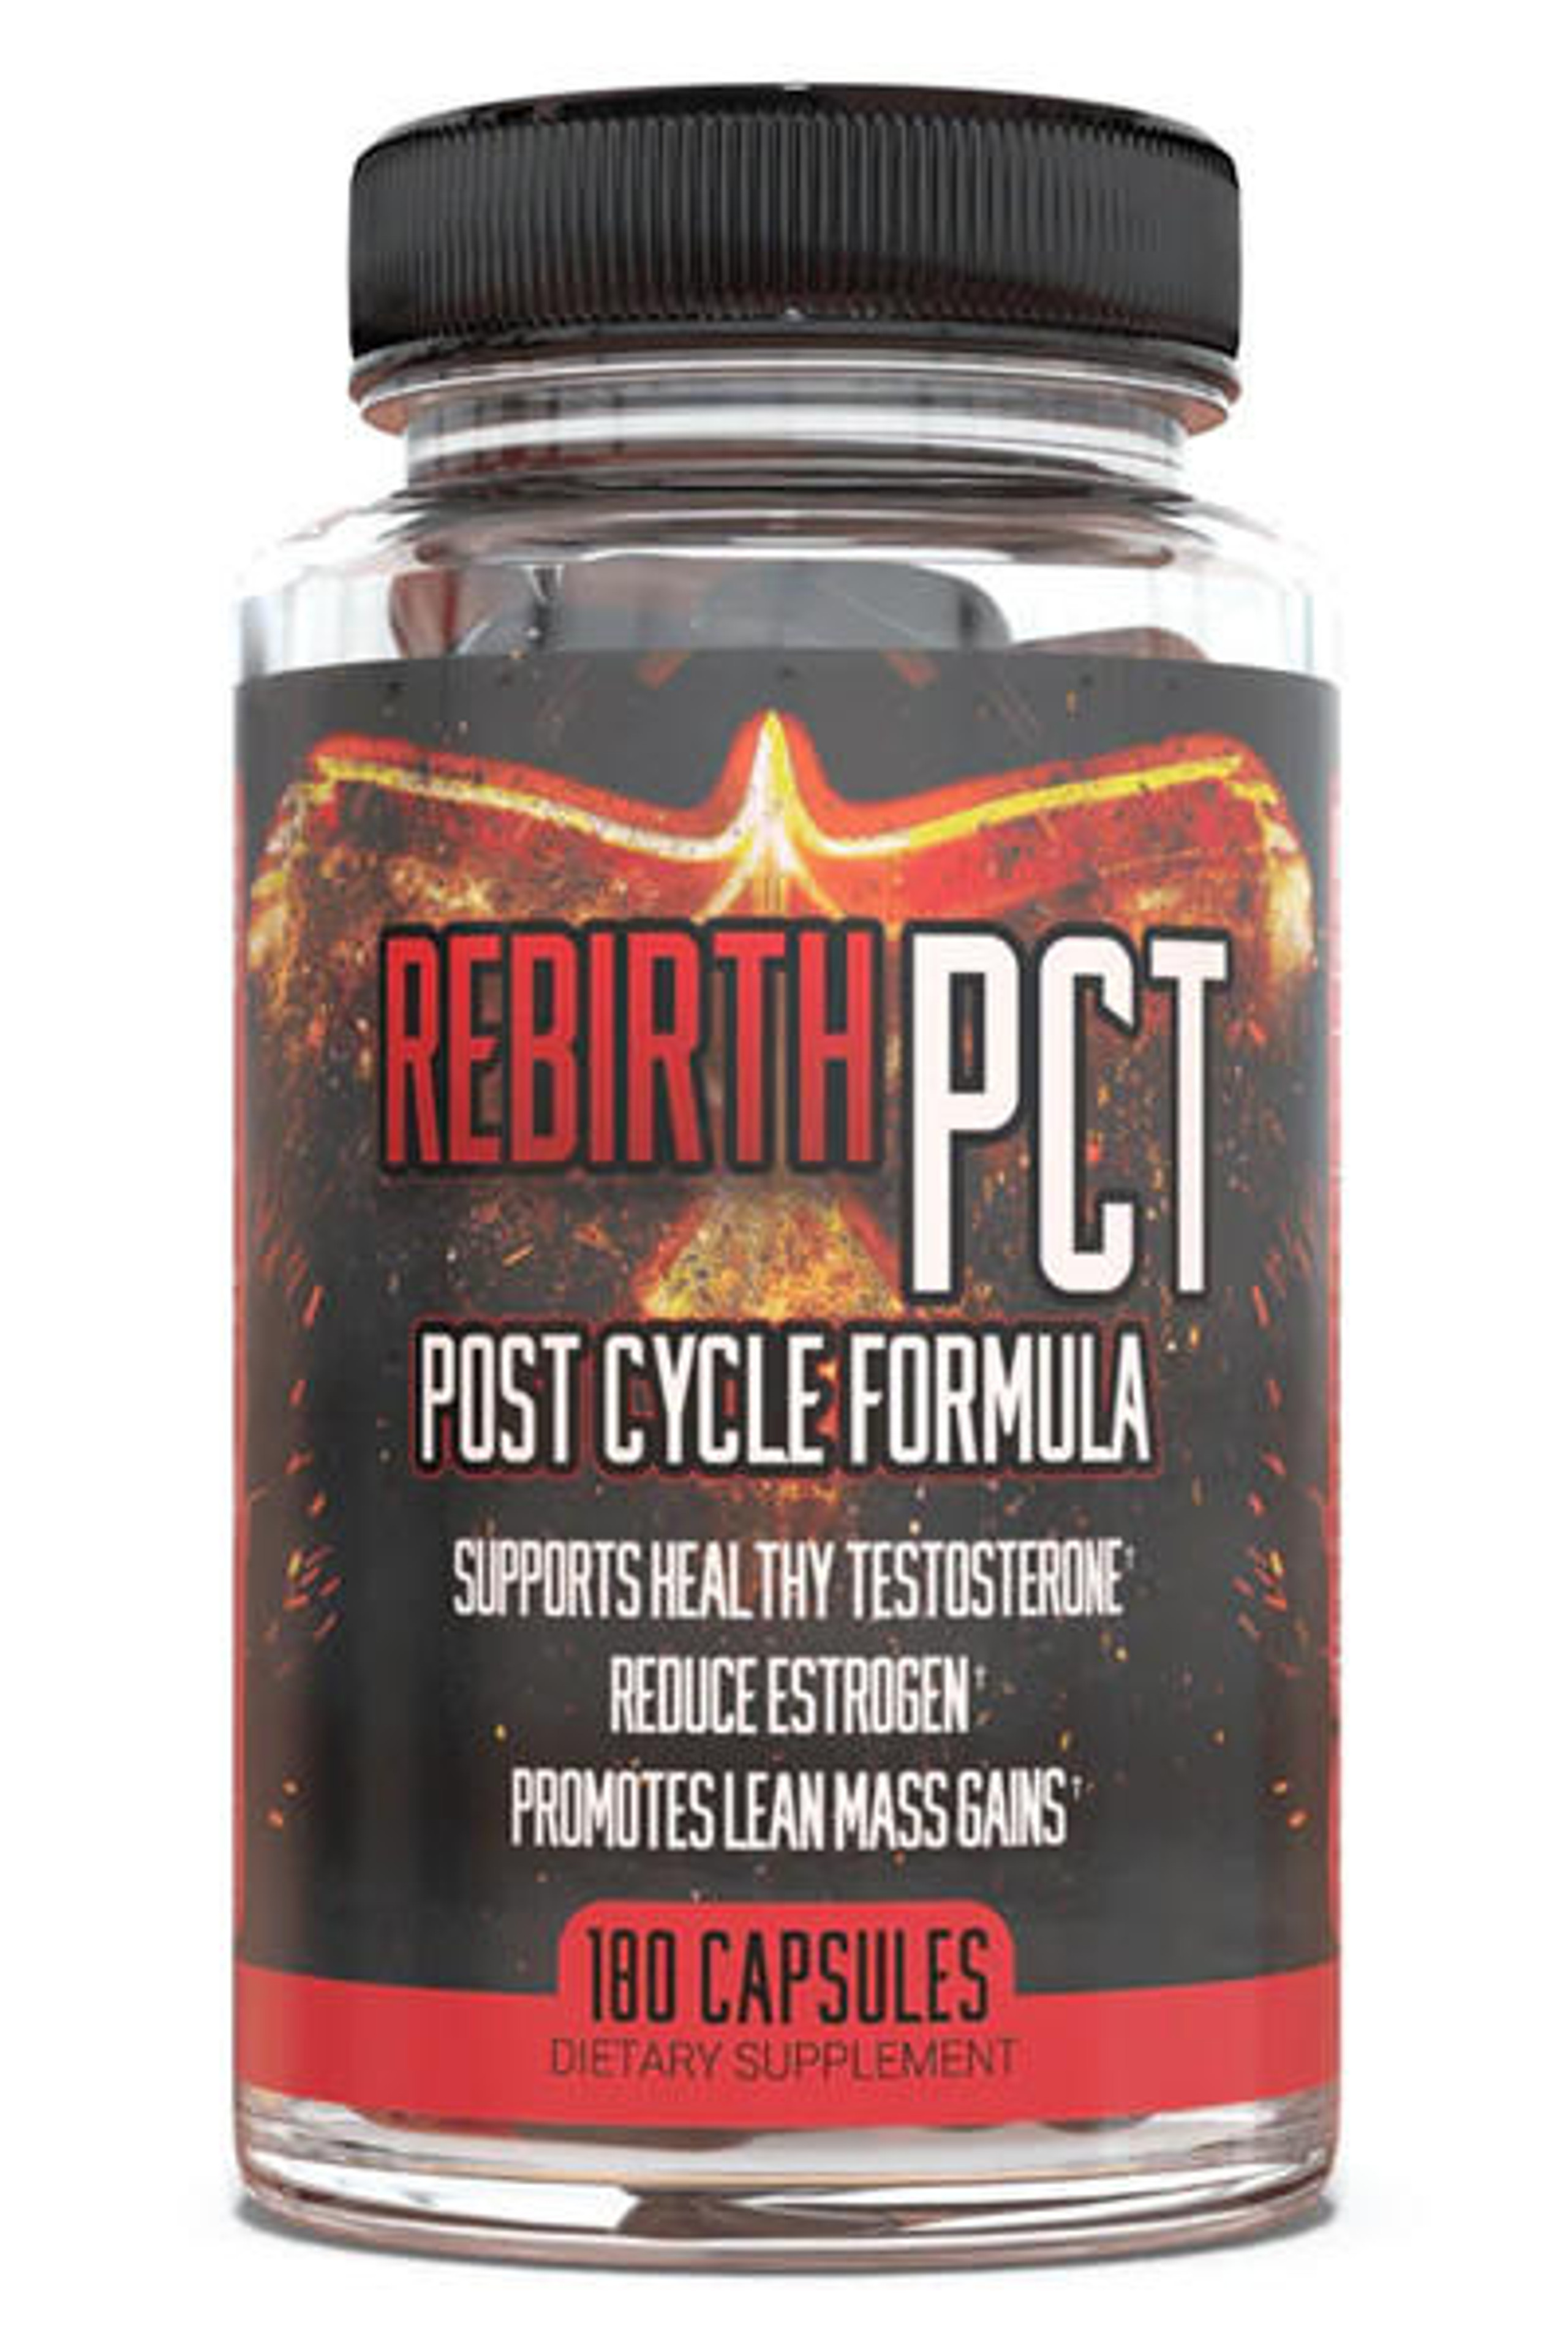 Rebirth PCT by Huge Supplements